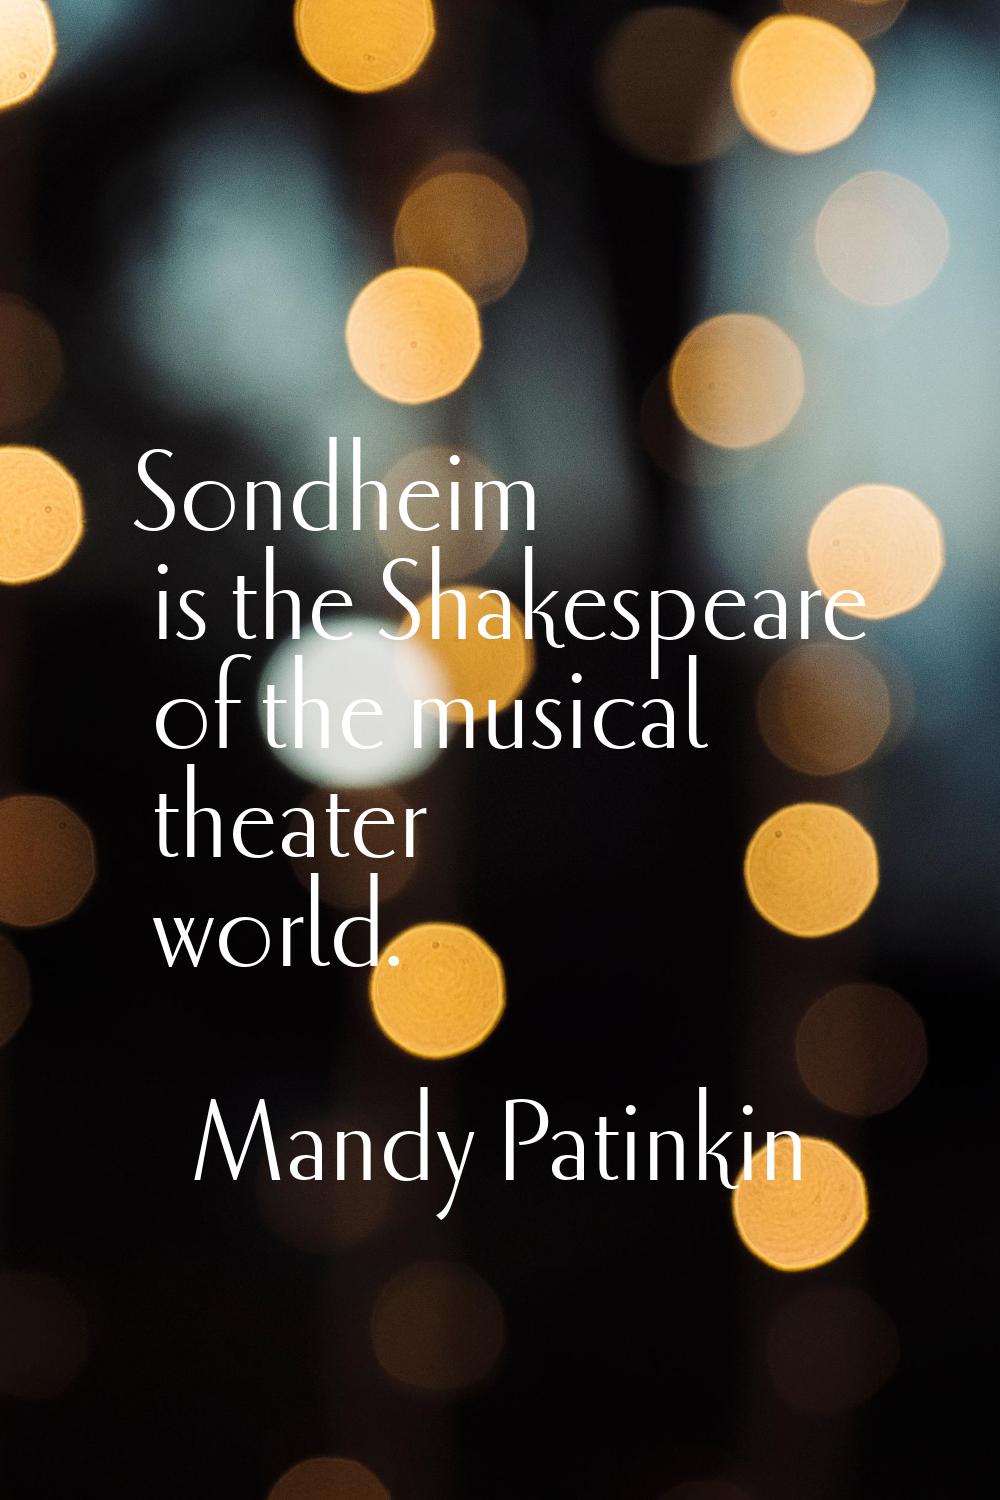 Sondheim is the Shakespeare of the musical theater world.